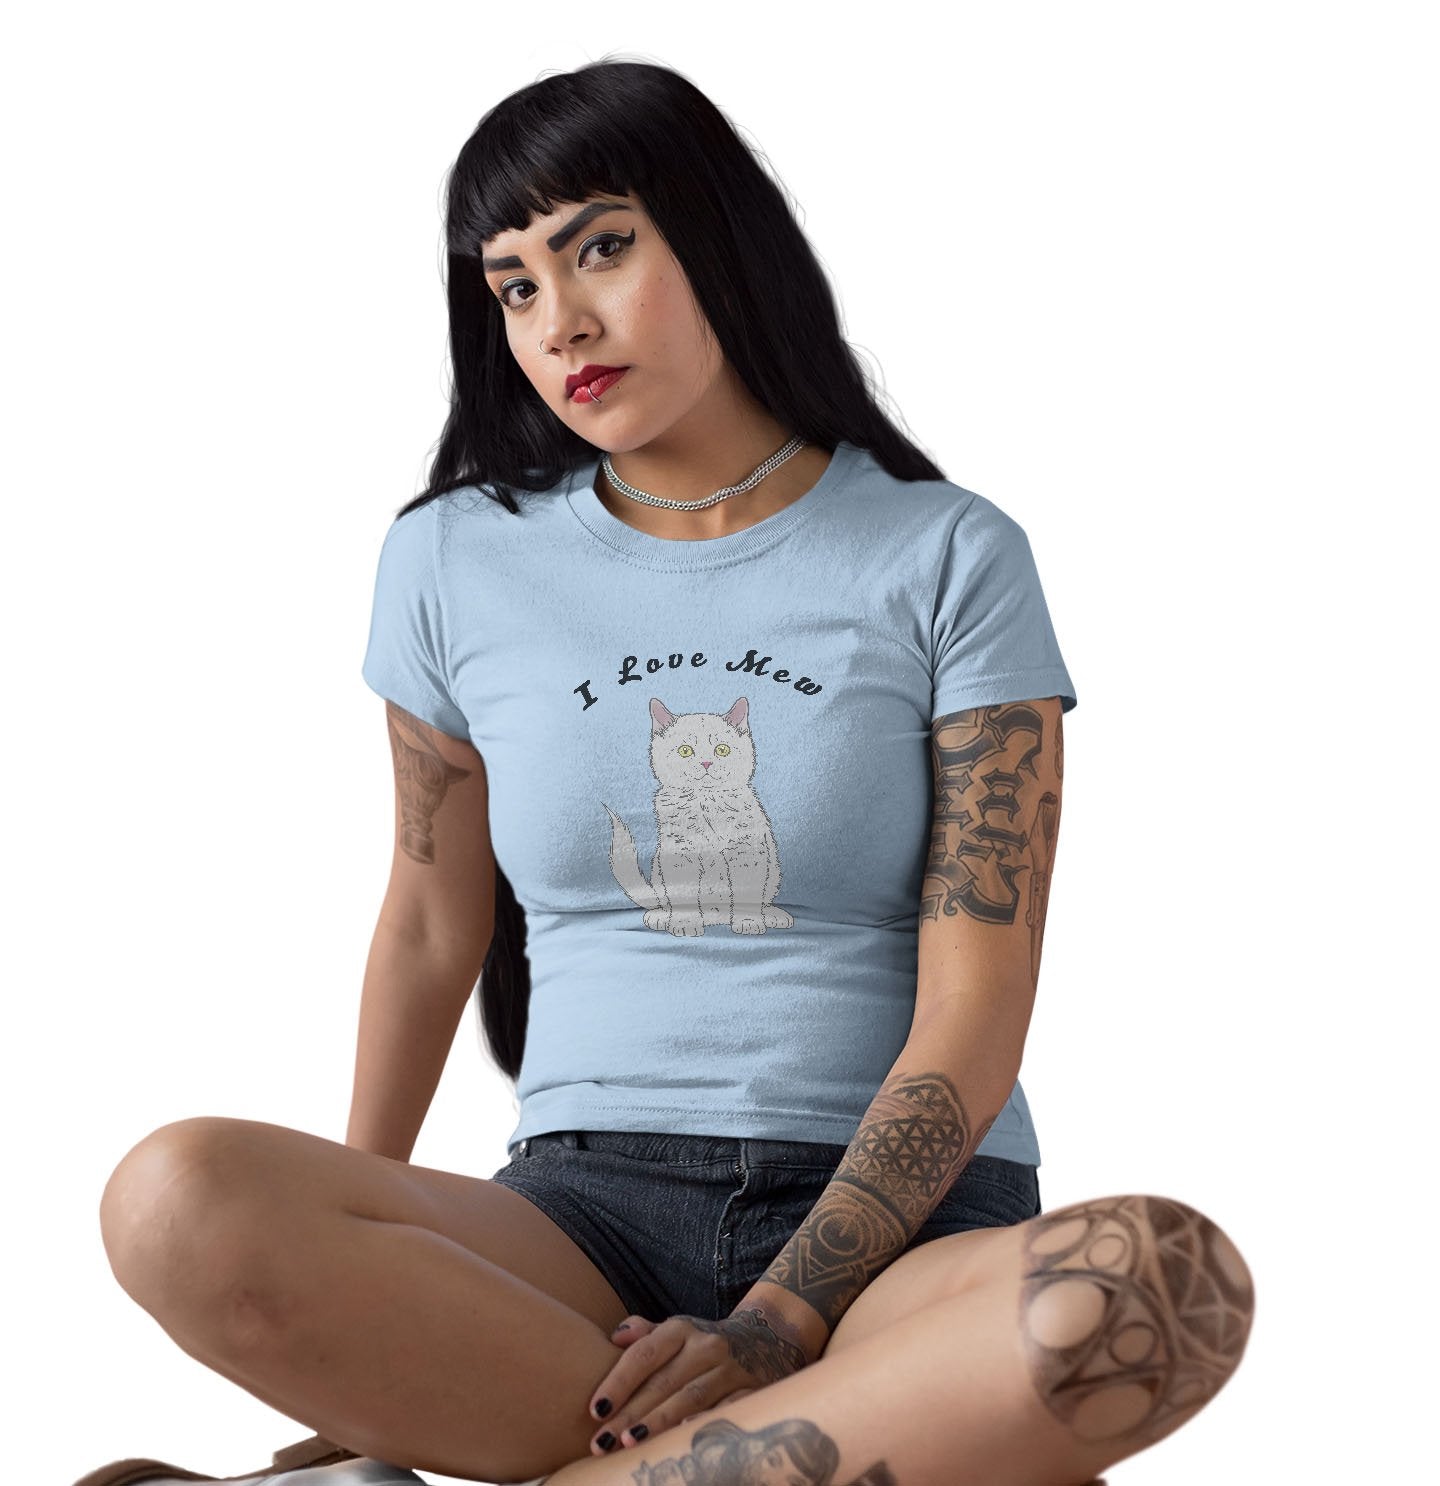 I Love Mew - Women's Fitted T-Shirt